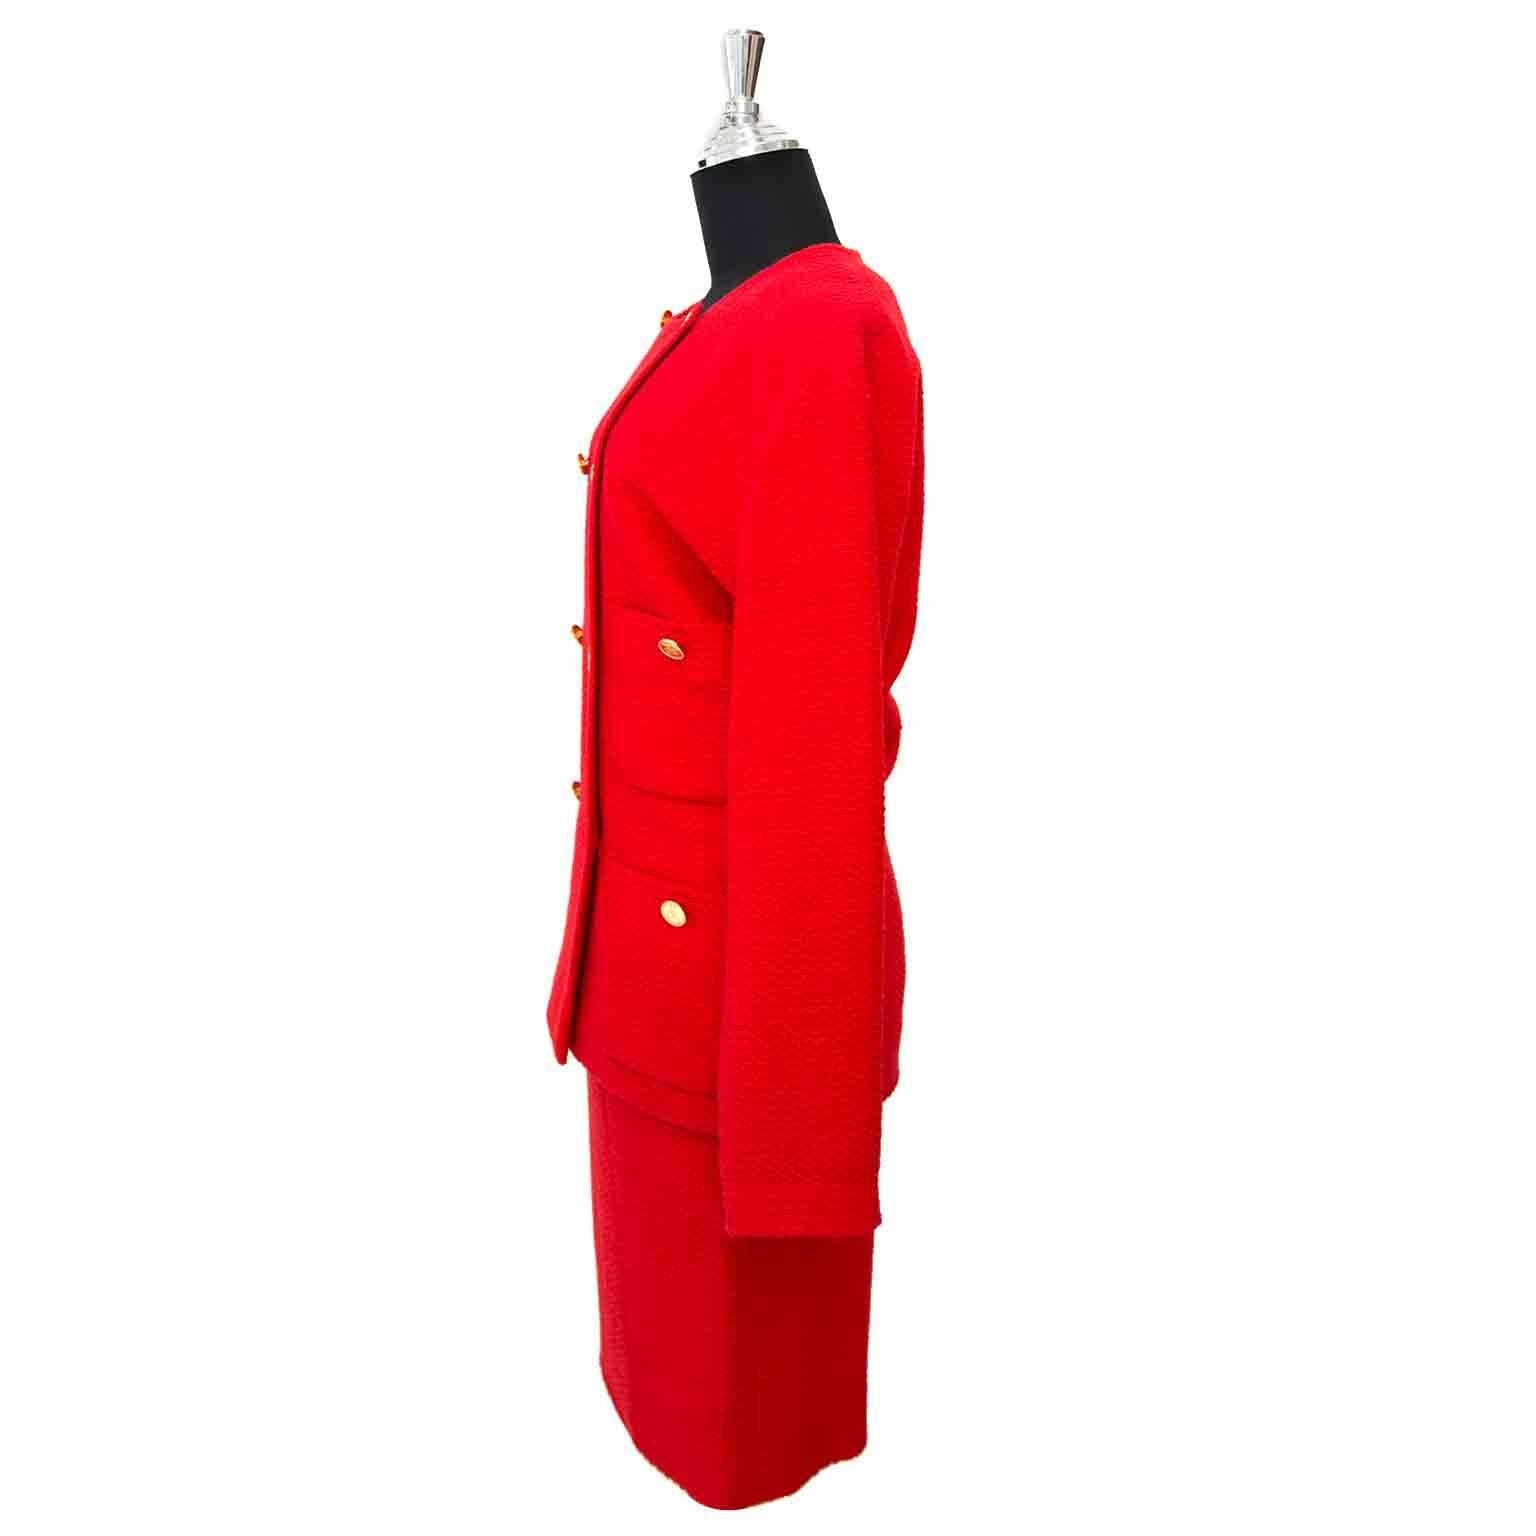 Very good condition

Chanel Red Bouclé Tailleur Set

It was 1925 when Coco chanel introdiced her first Chanel Suit
Today, we have Karl Lagerfield to thank for making it one of the most recongnizable in the world.
Wear this beautiful Chanel Tailleur